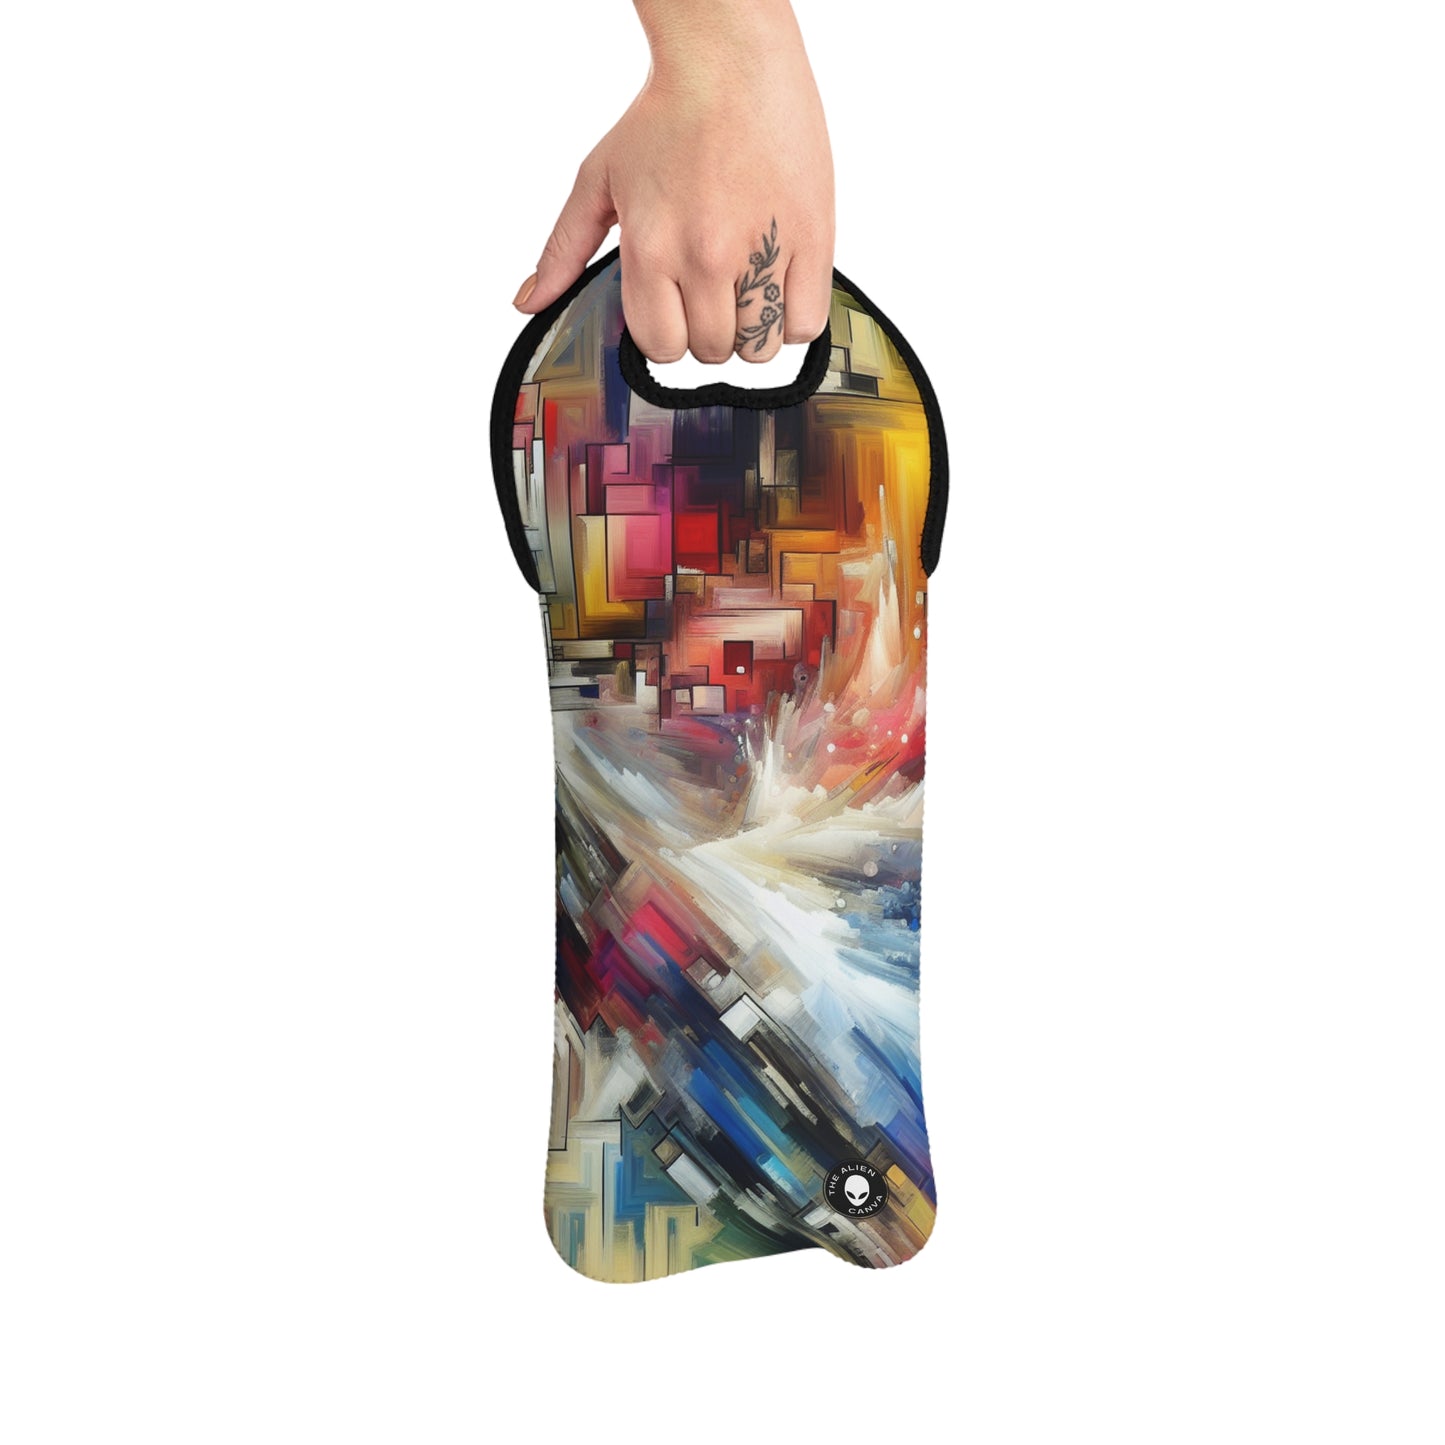 "Nature's Fury: An Abstract Expressionist Interpretation of a Raging Thunderstorm" - The Alien Wine Tote Bag Abstract Expressionism